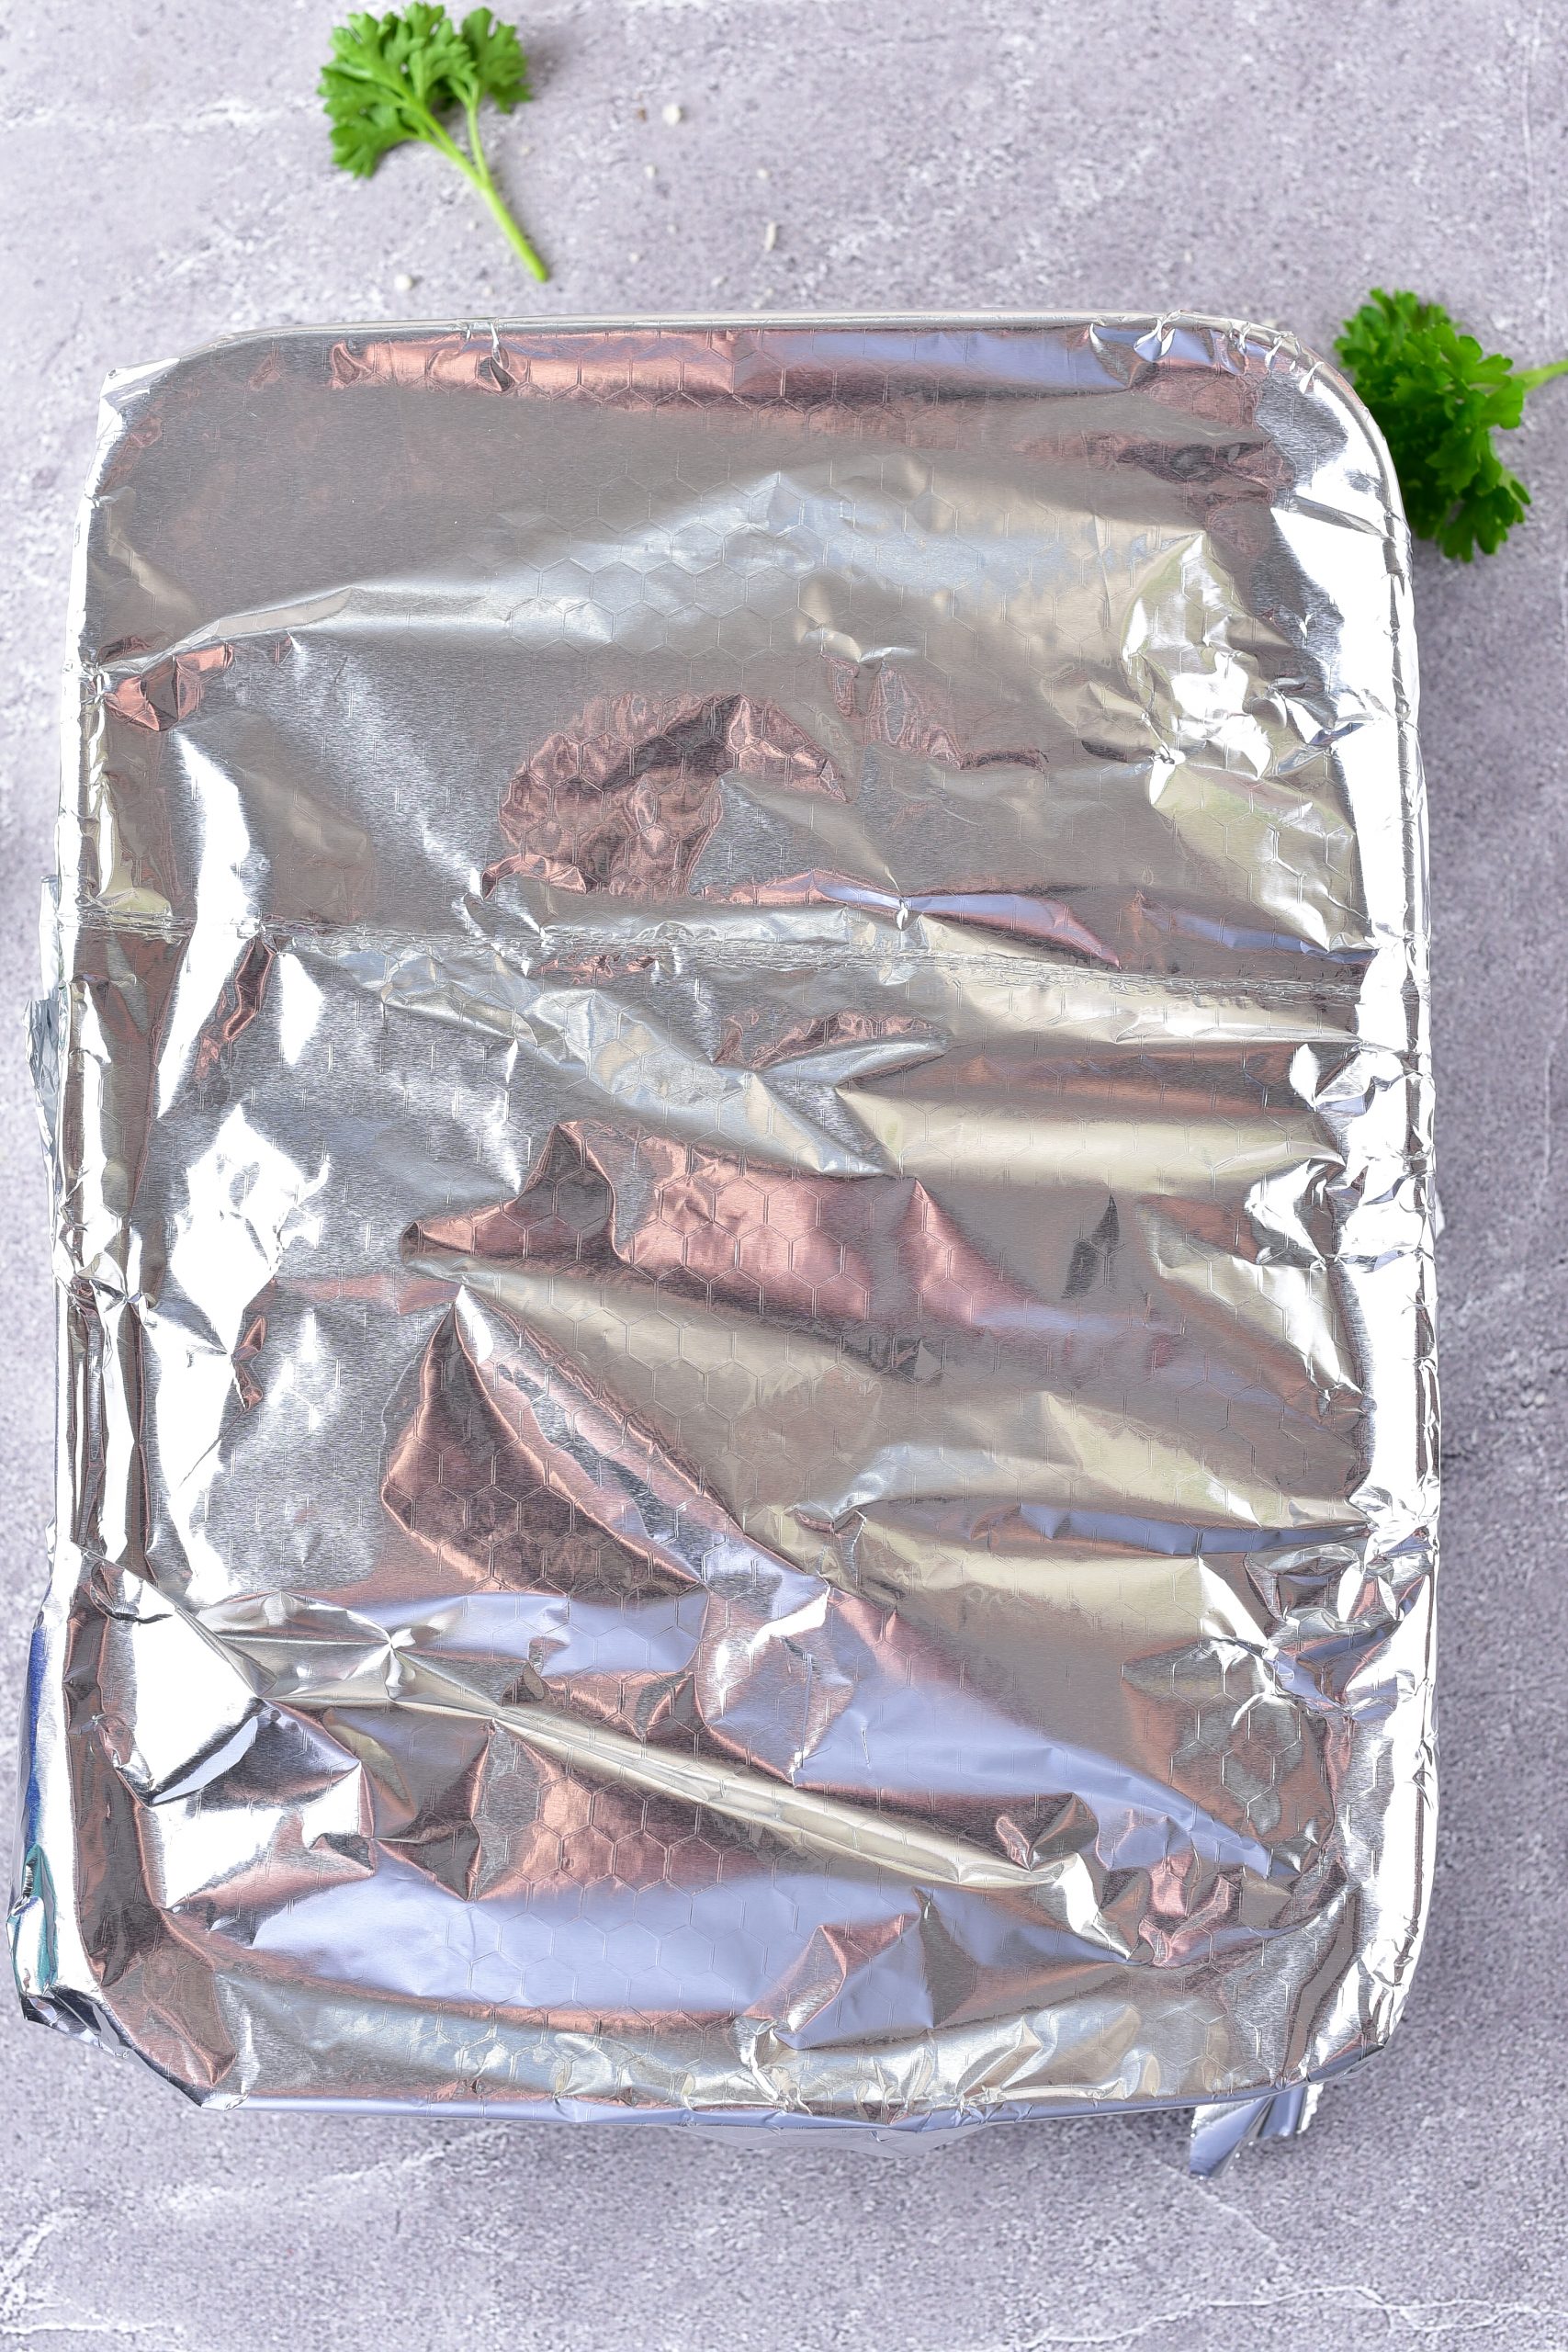 Tent a piece of tin foil over the baking sheet, and bake covered for 30 minutes. 